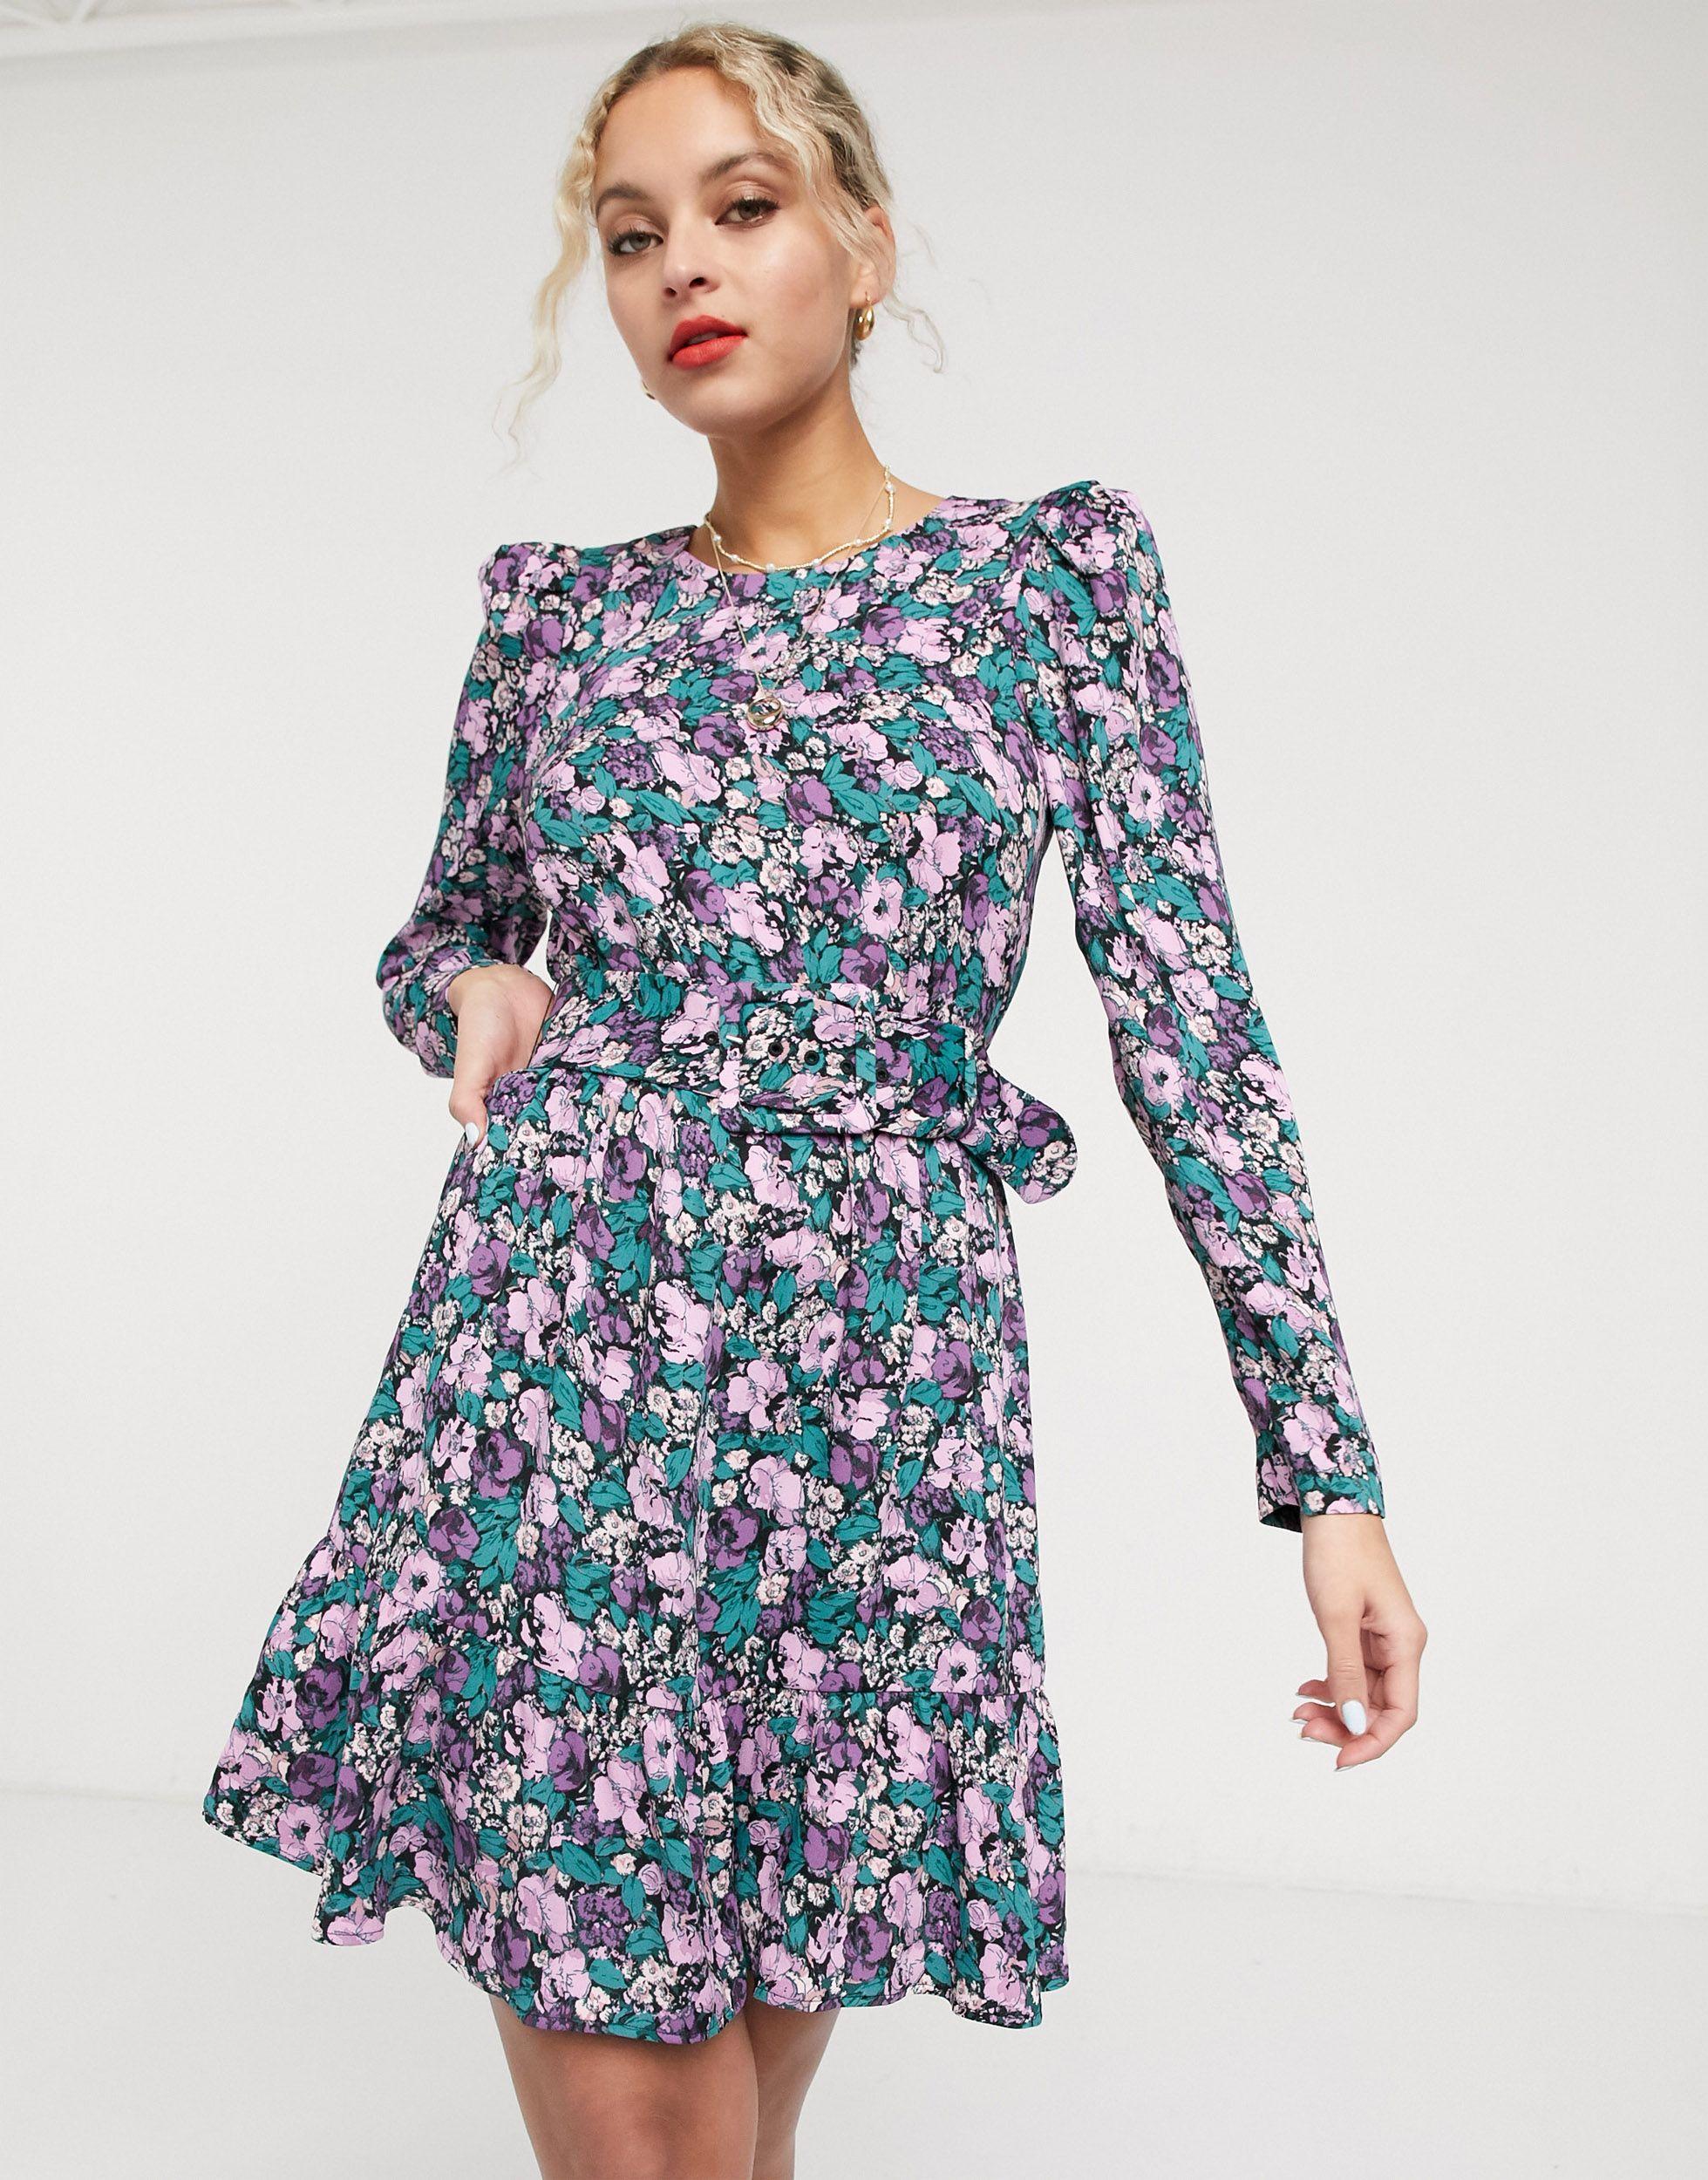 & Other Stories Floral Print Belted Mini Dress in Blue | Lyst